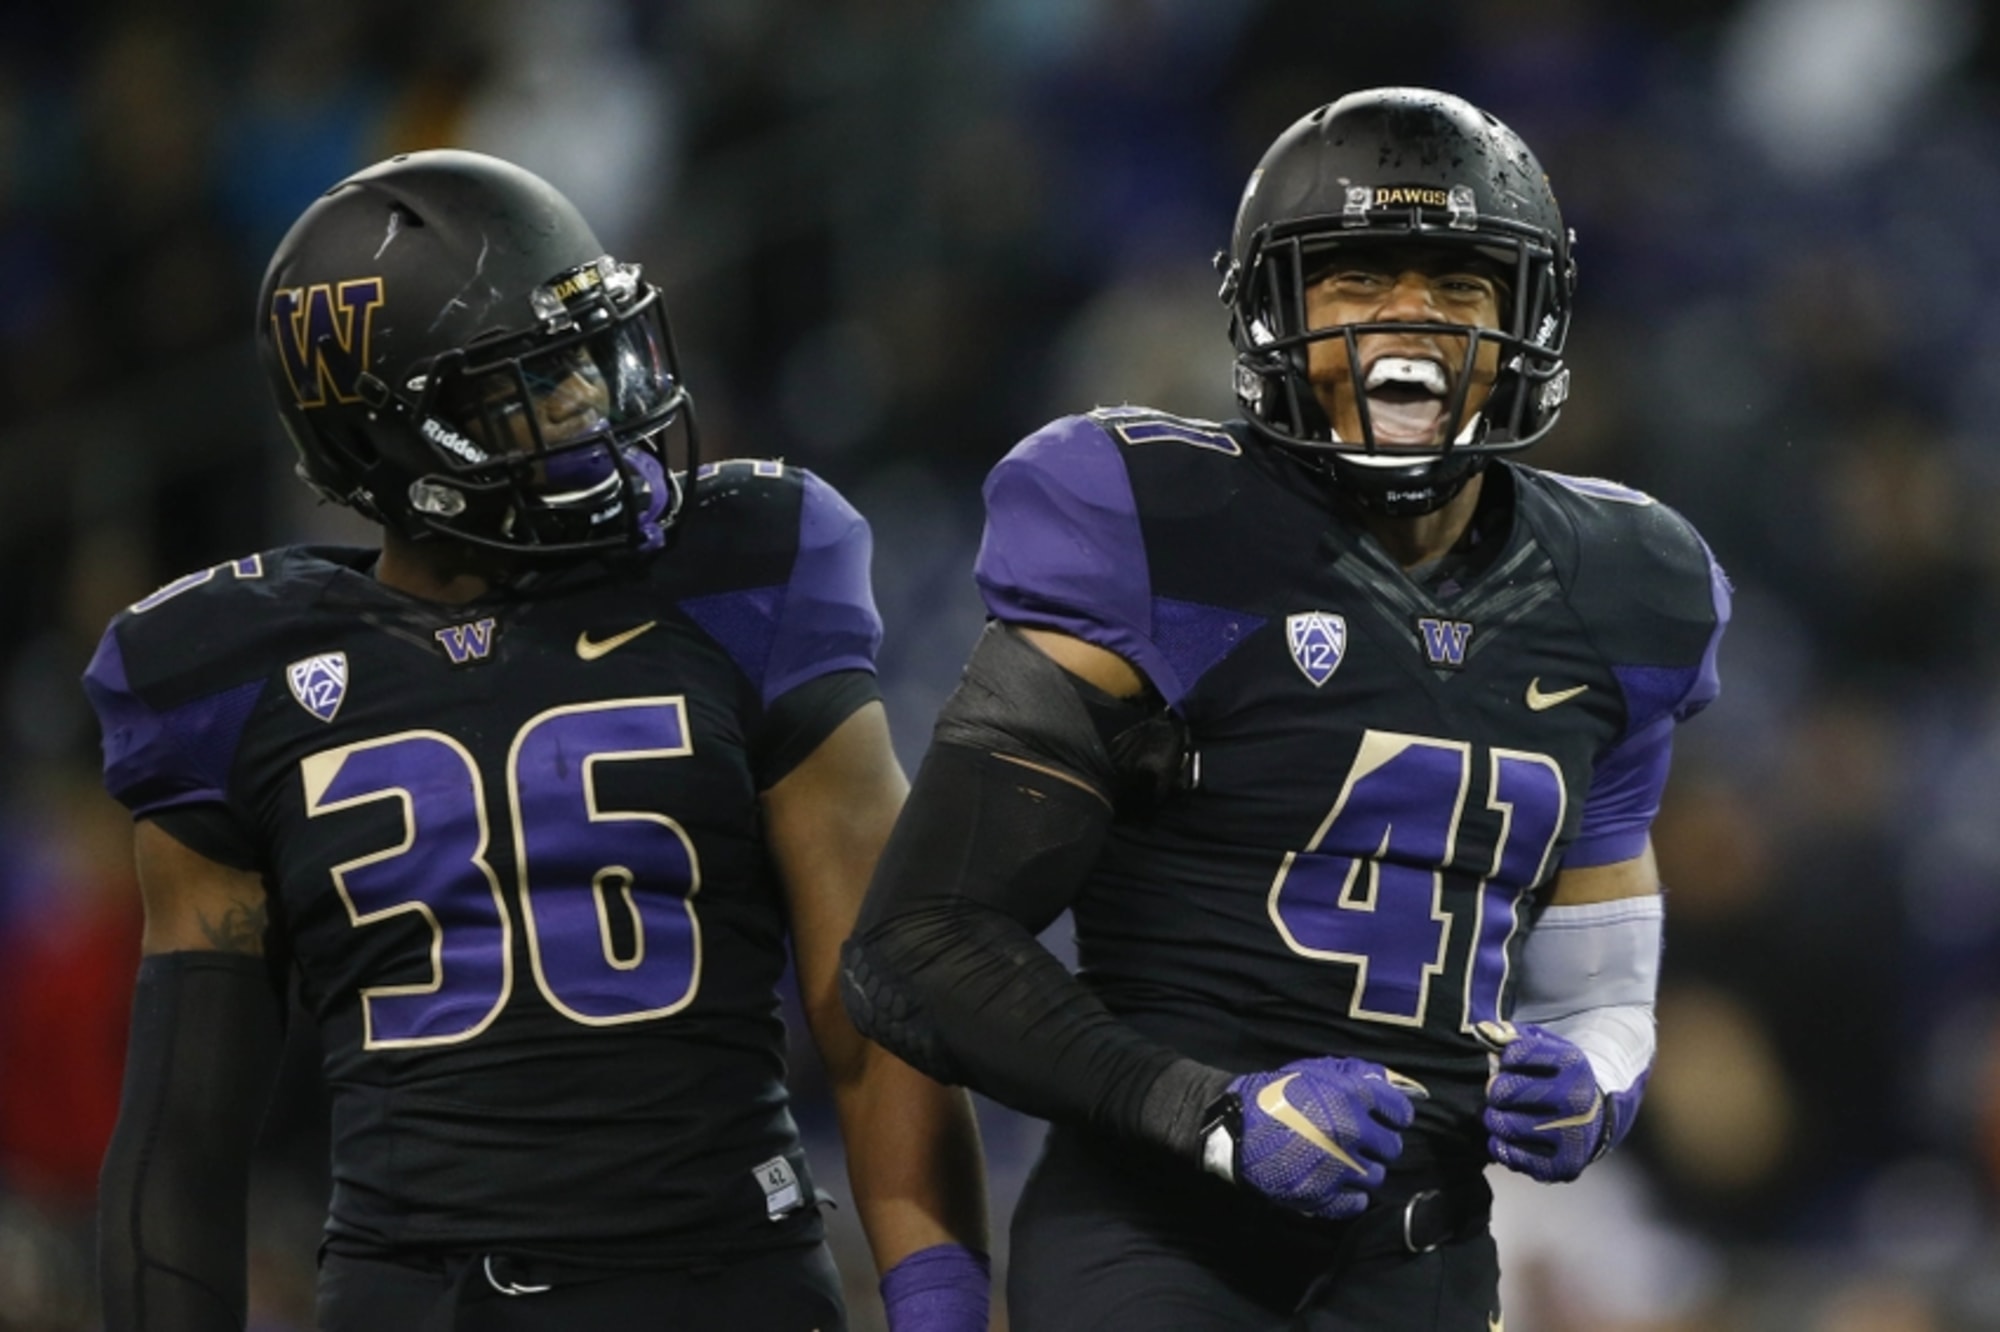 UW Huskies: Seven Players to Play on Sunday After Draft